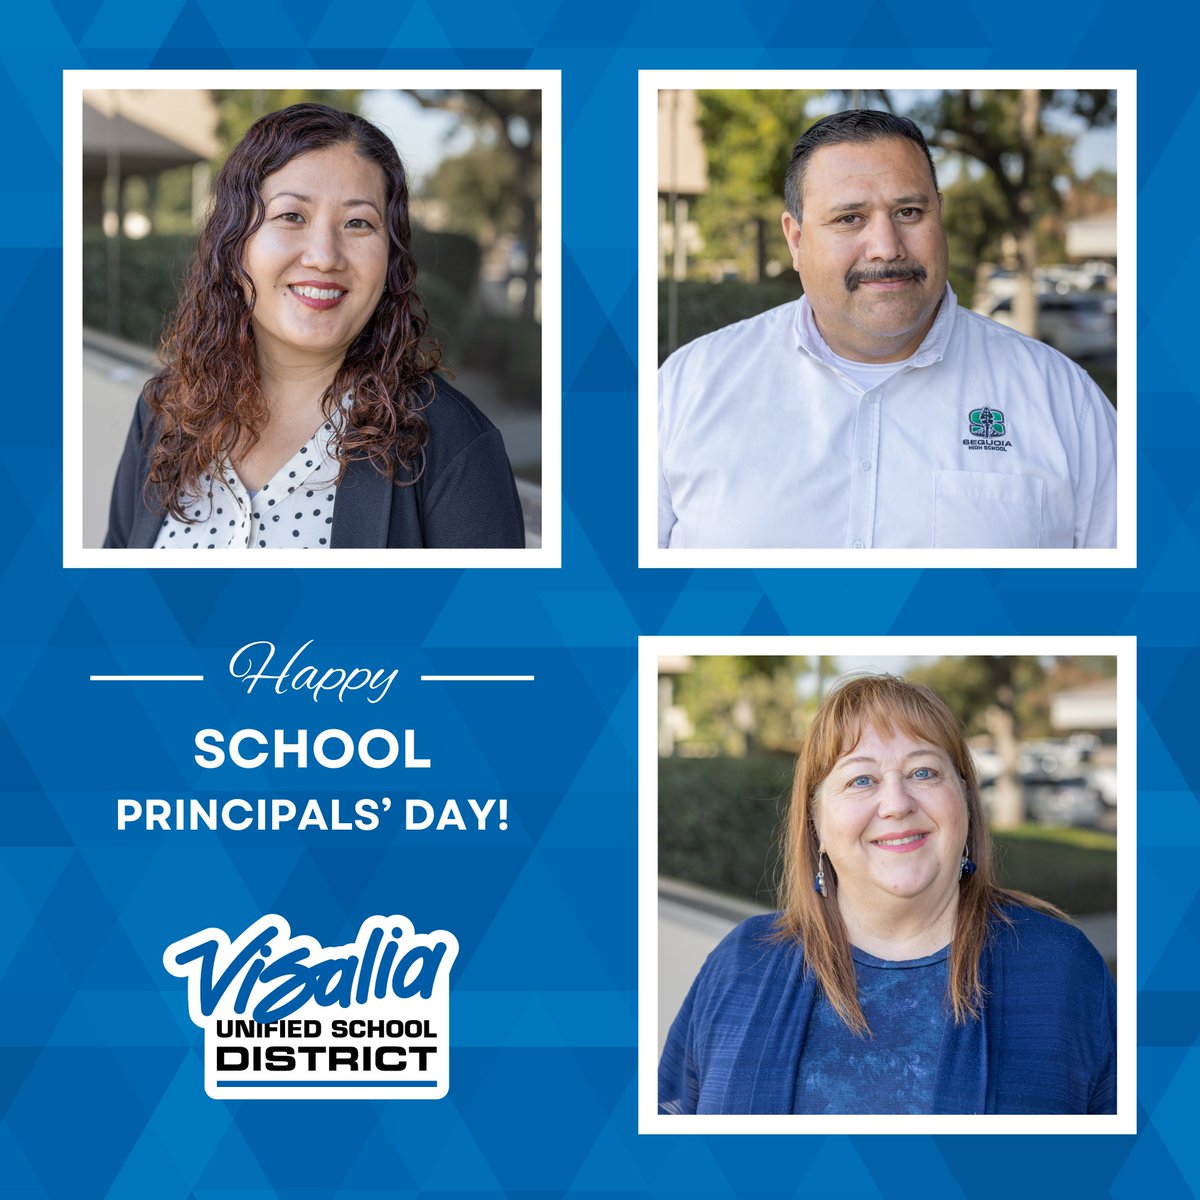 We appreciate the educational leaders who look after our VUSD students every day. Thank you VUSD Principals for all that you do! #IamVUSD